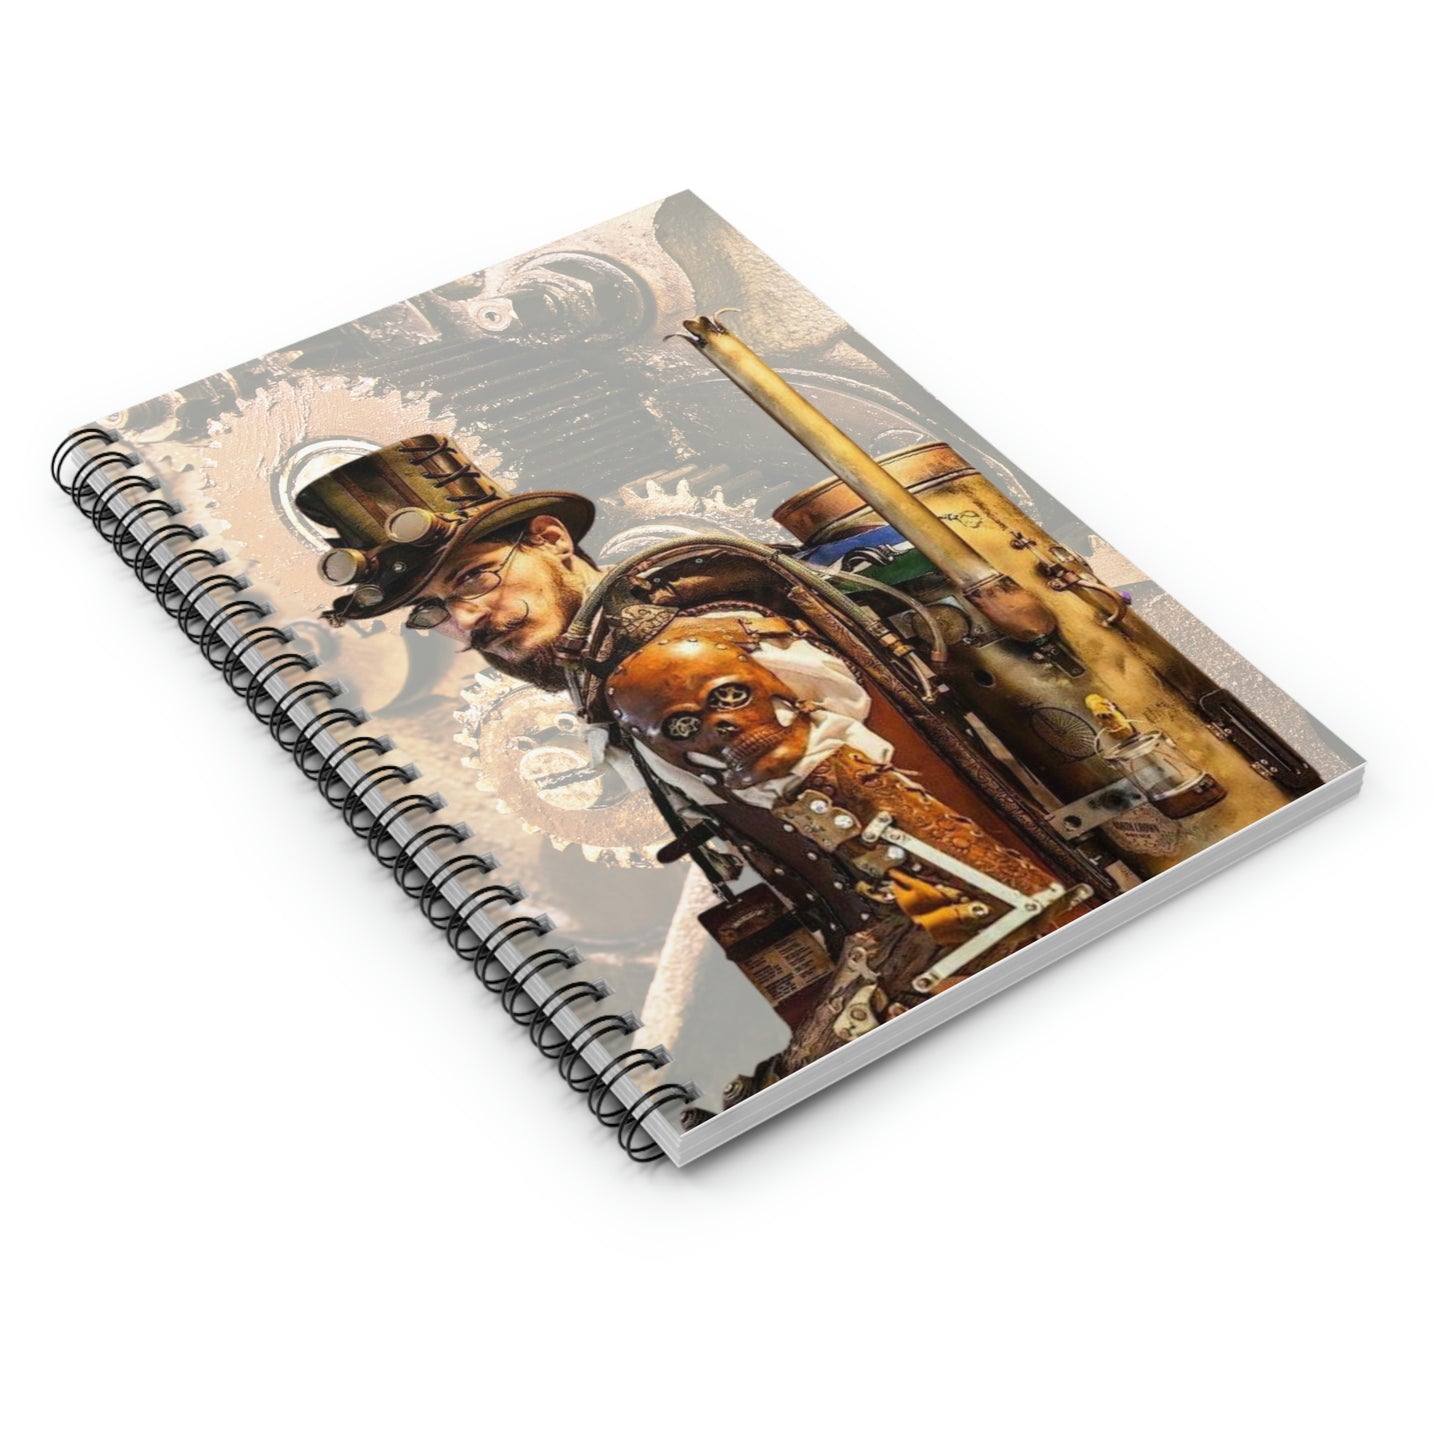 Steampunk Journal / Spiral Notebook - Ruled Line Lord and Lady Towers